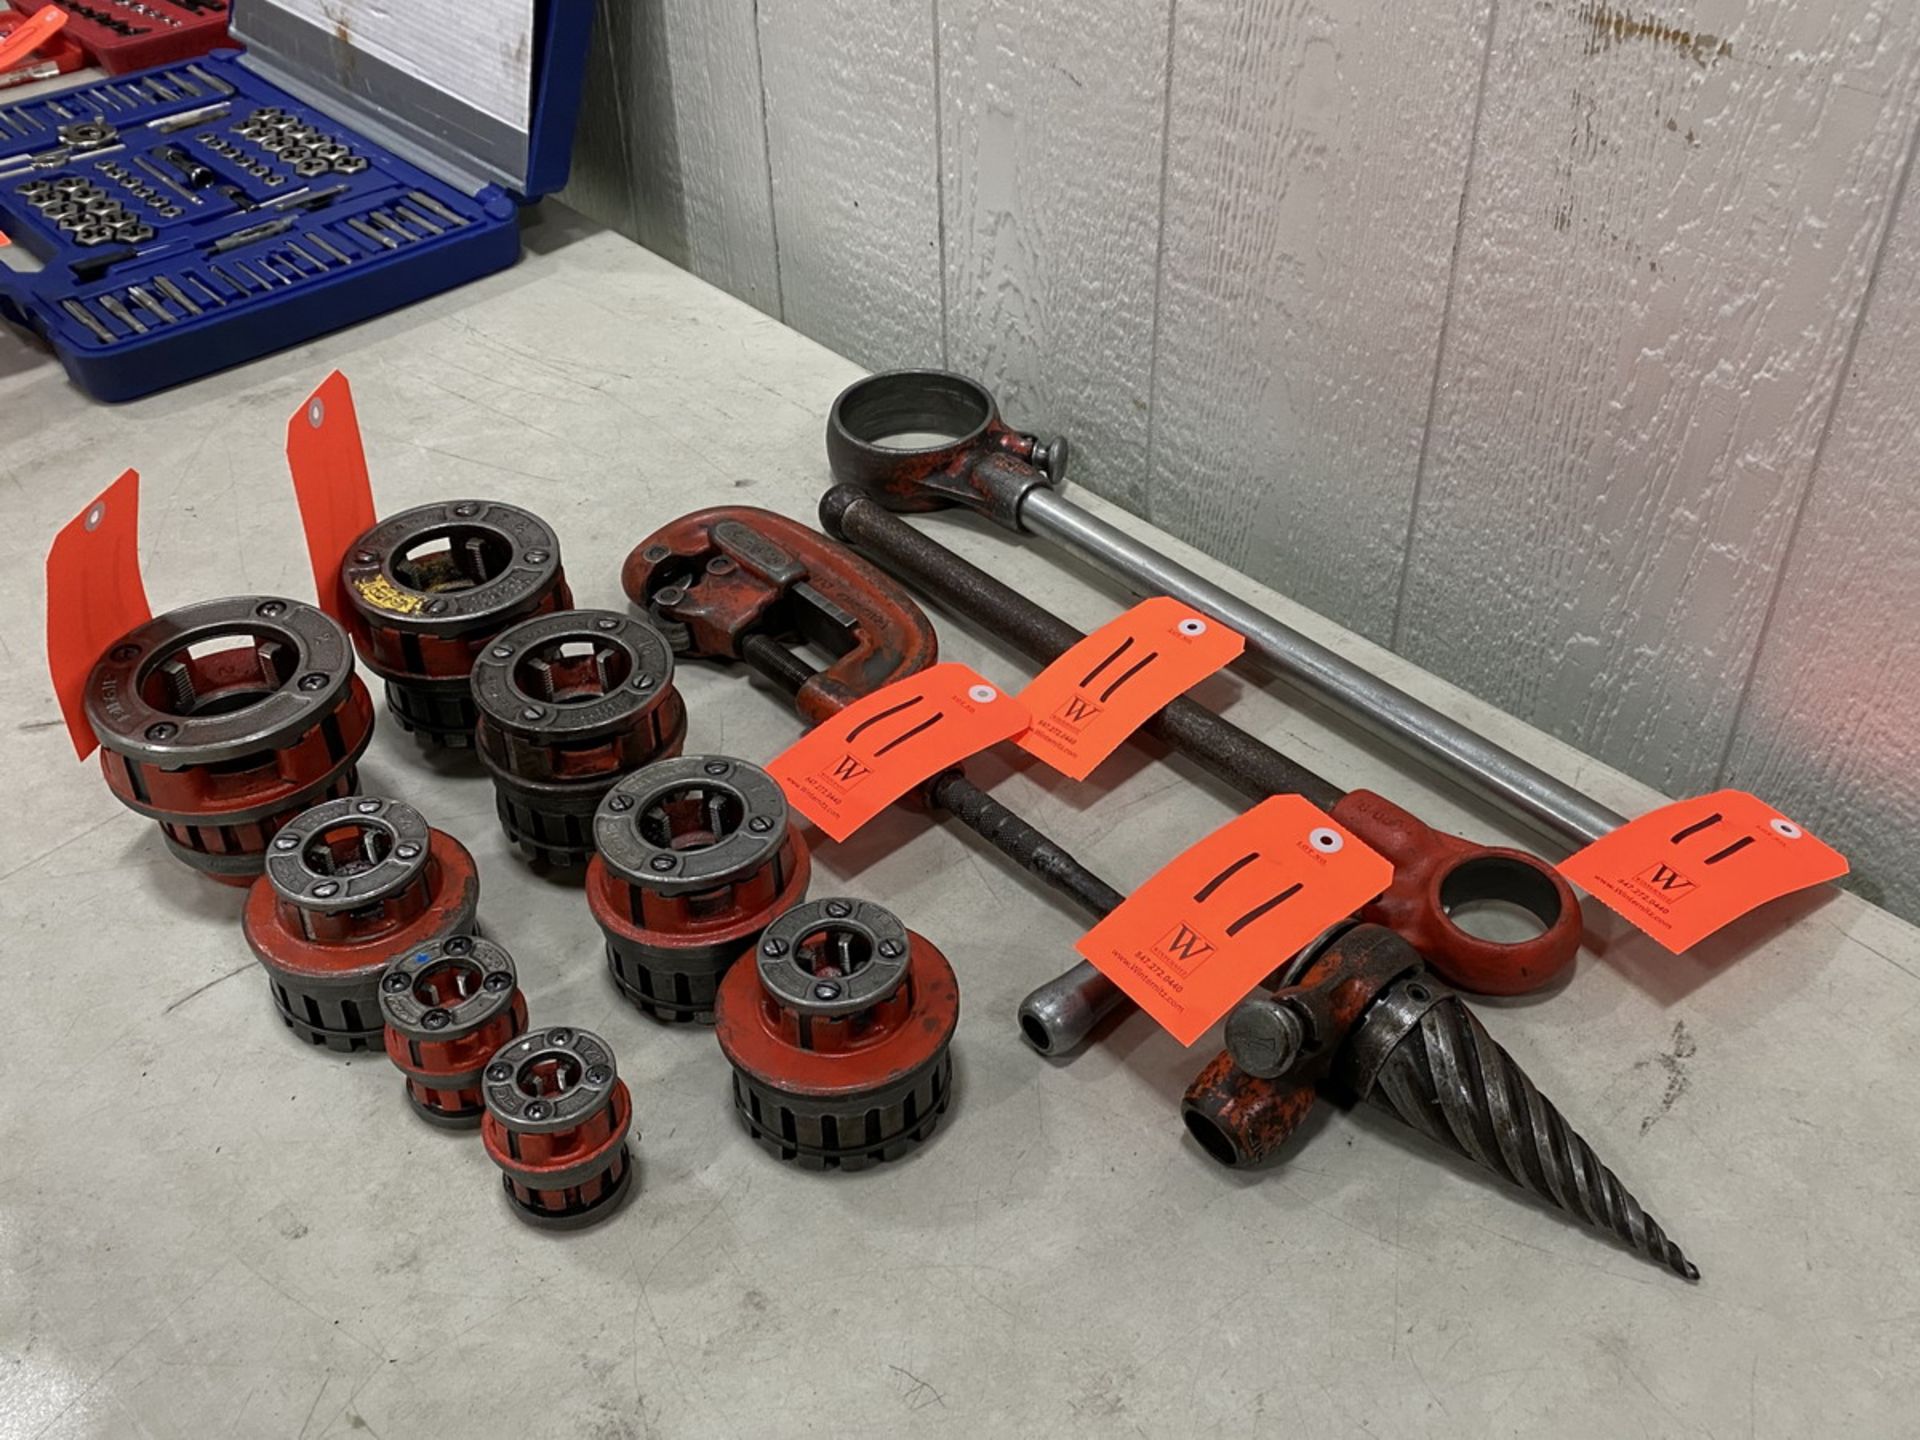 Lot - Ridgid Exposed Ratchet Threader; to Include: (2) Ratchet Handles, (1) Pipe Reamer, (1) Pipe - Image 2 of 3